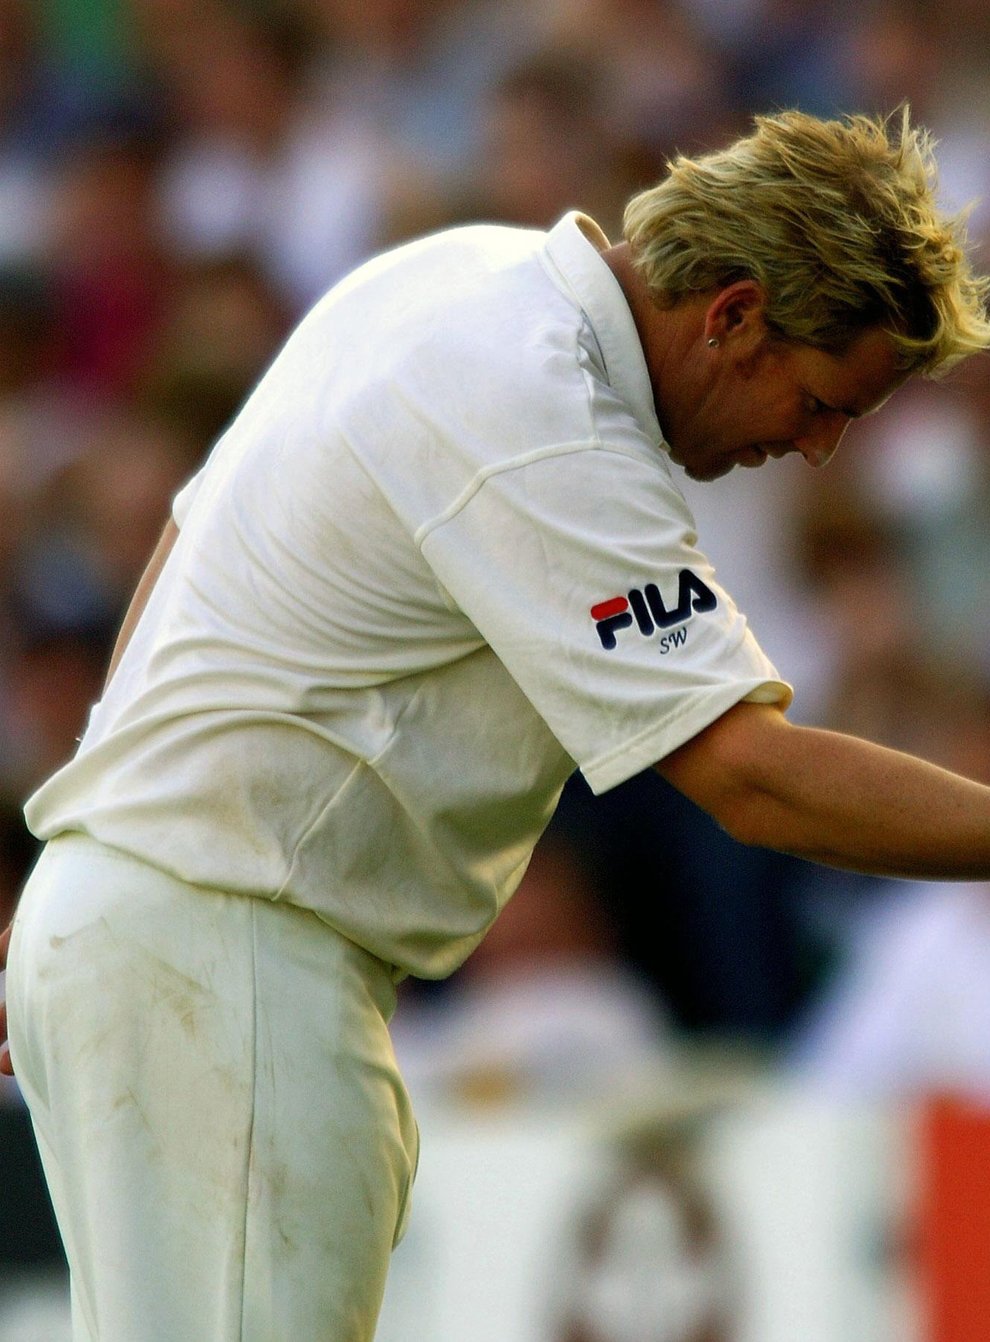 Australia’s Shane Warne bows to spectators after they show appreciation for his five Ashes wickets against England at the Oval in 2005 (Rui Vieira/PA)